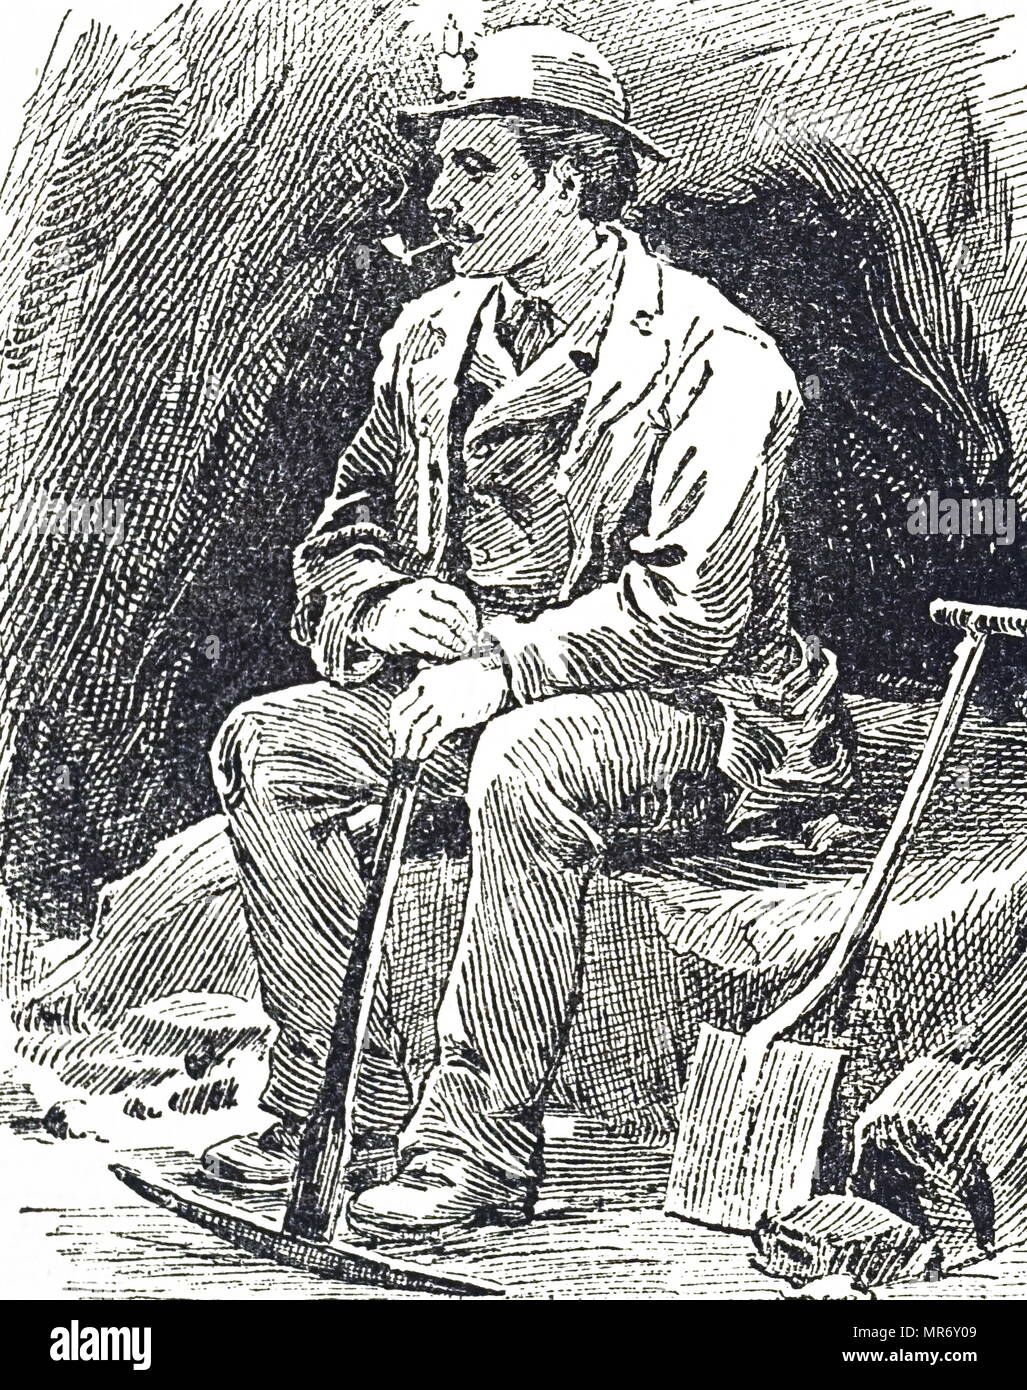 Engraving depicting a lead miner from Durham going to work. He is carrying his miner's pick and his shovel, and on his helmet is the candle for lighting his way underground. He is smoking a clay pipe on his break. 19th century Stock Photo